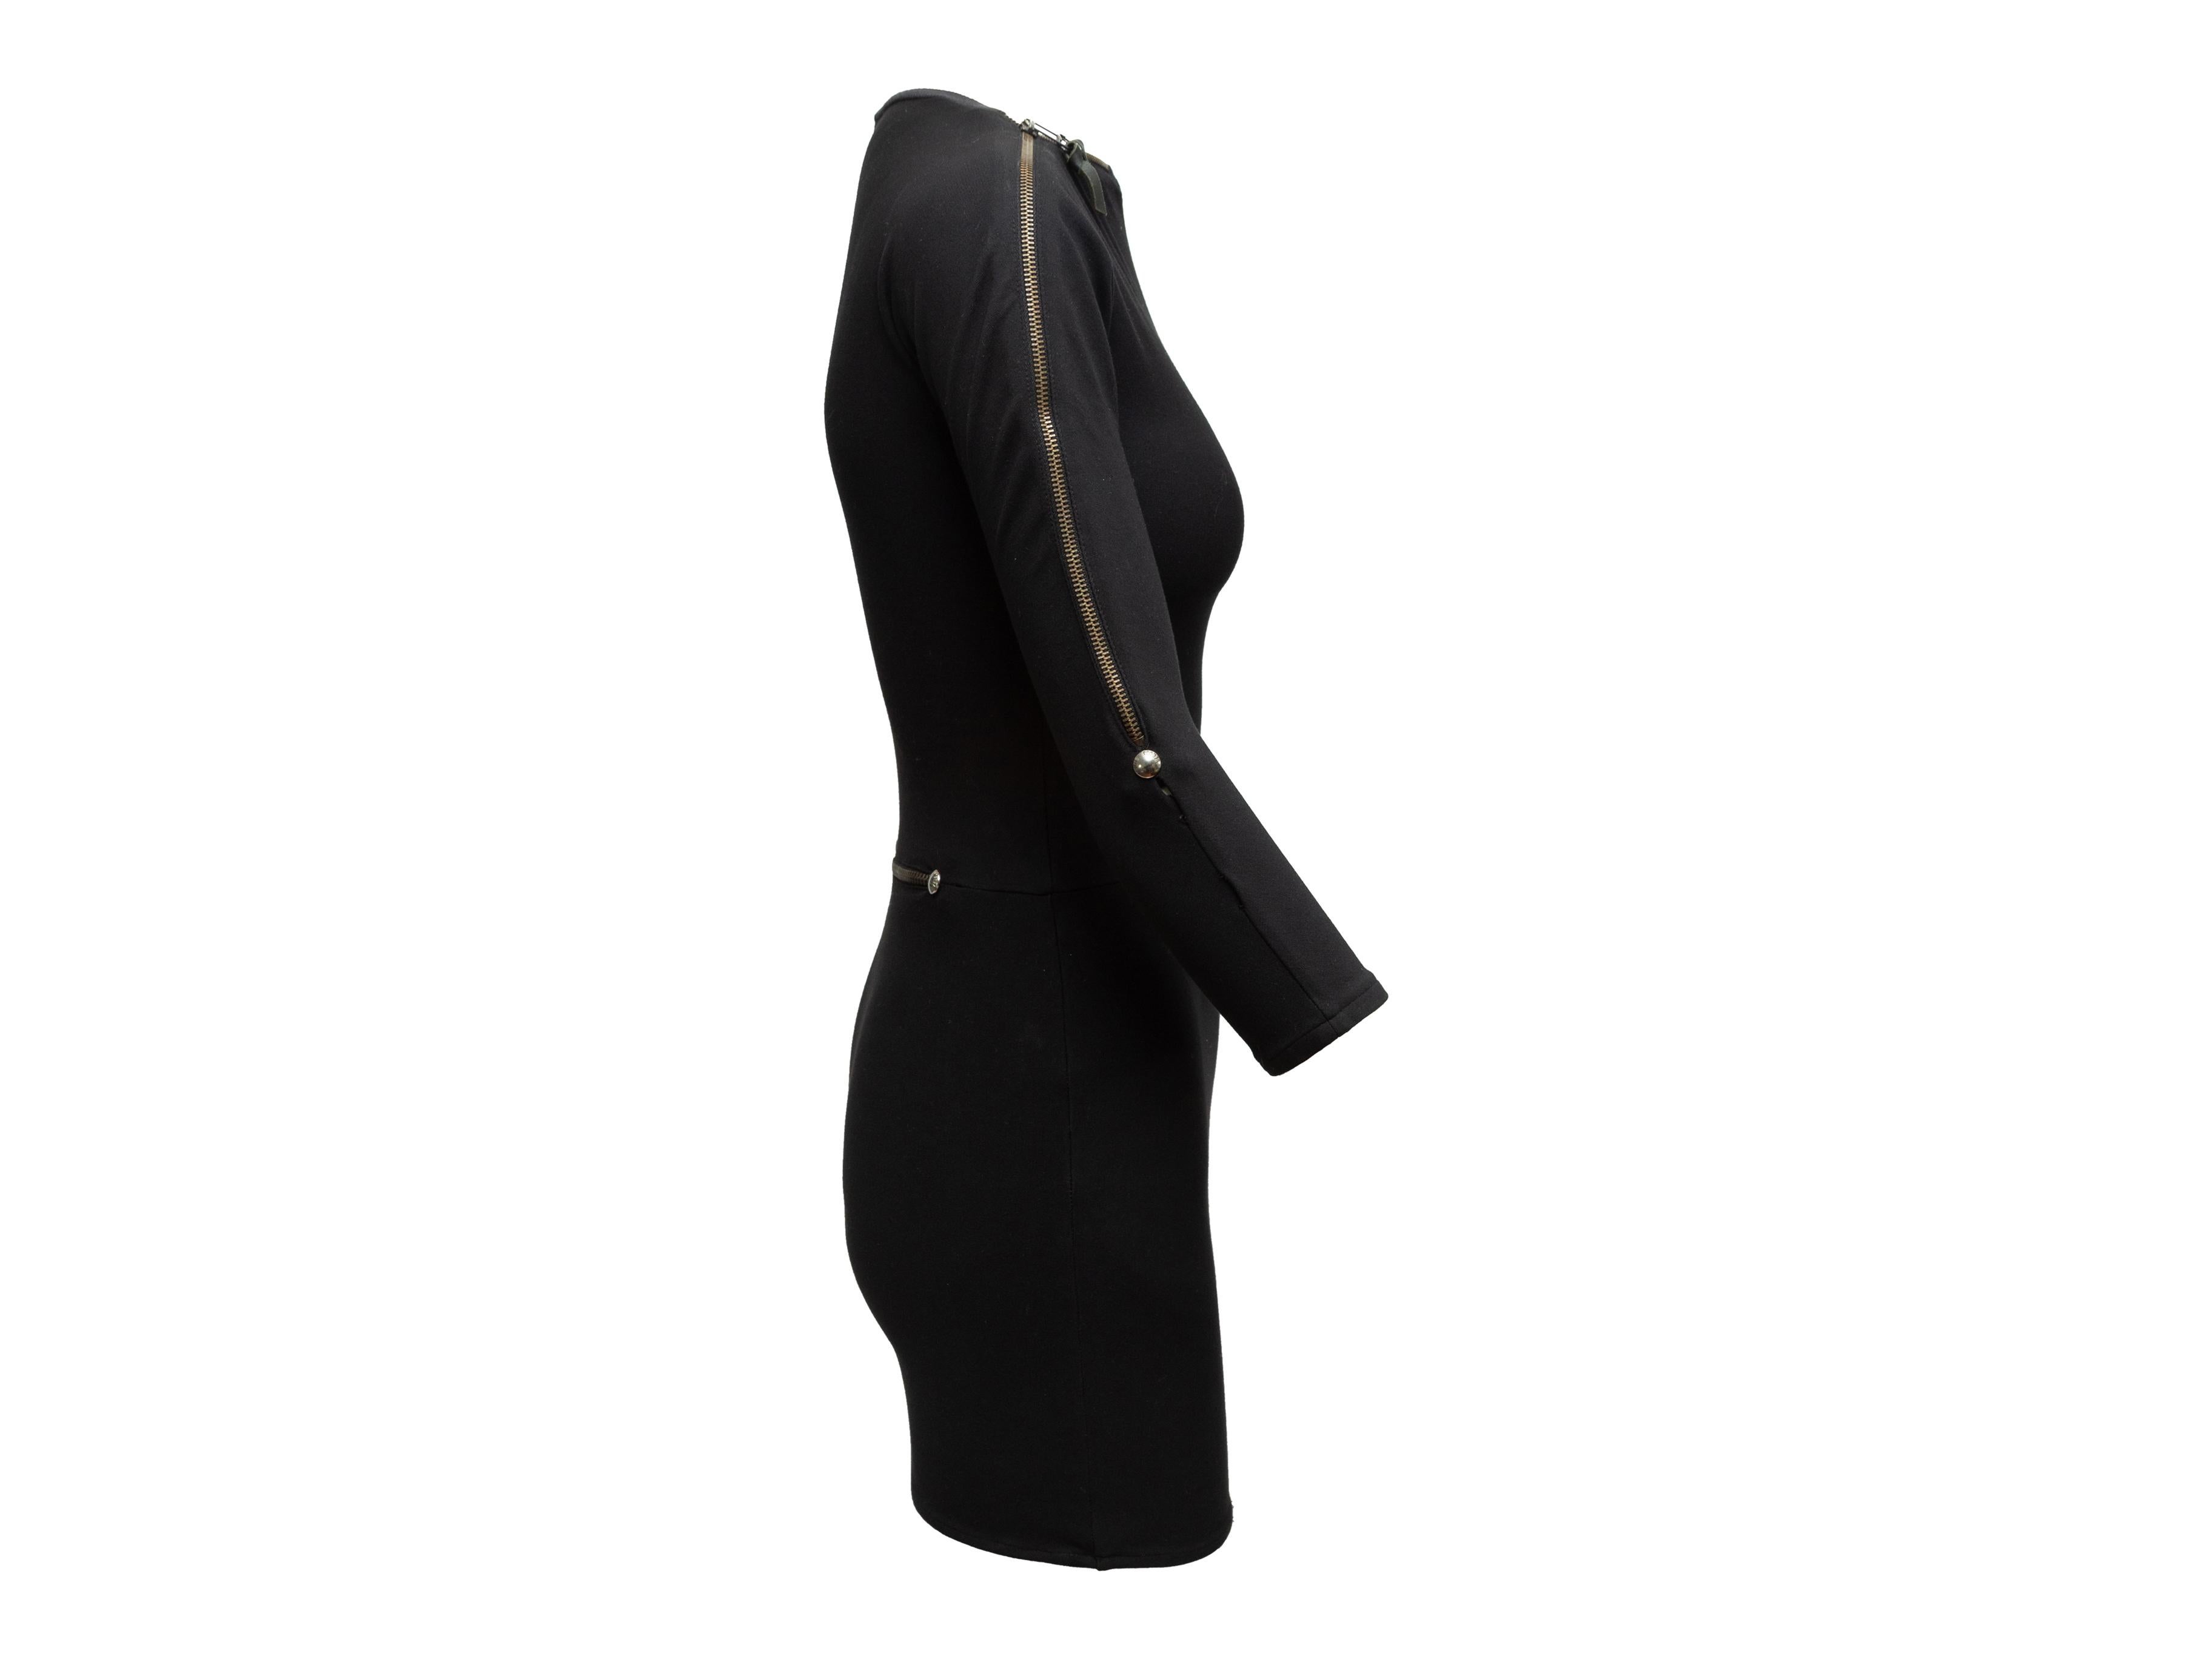 Product details: Black fitted mini dress by Versus Versace. Crew neck featuring zip accent. Long sleeves. Zip accent at waist. Designer size 38. 24